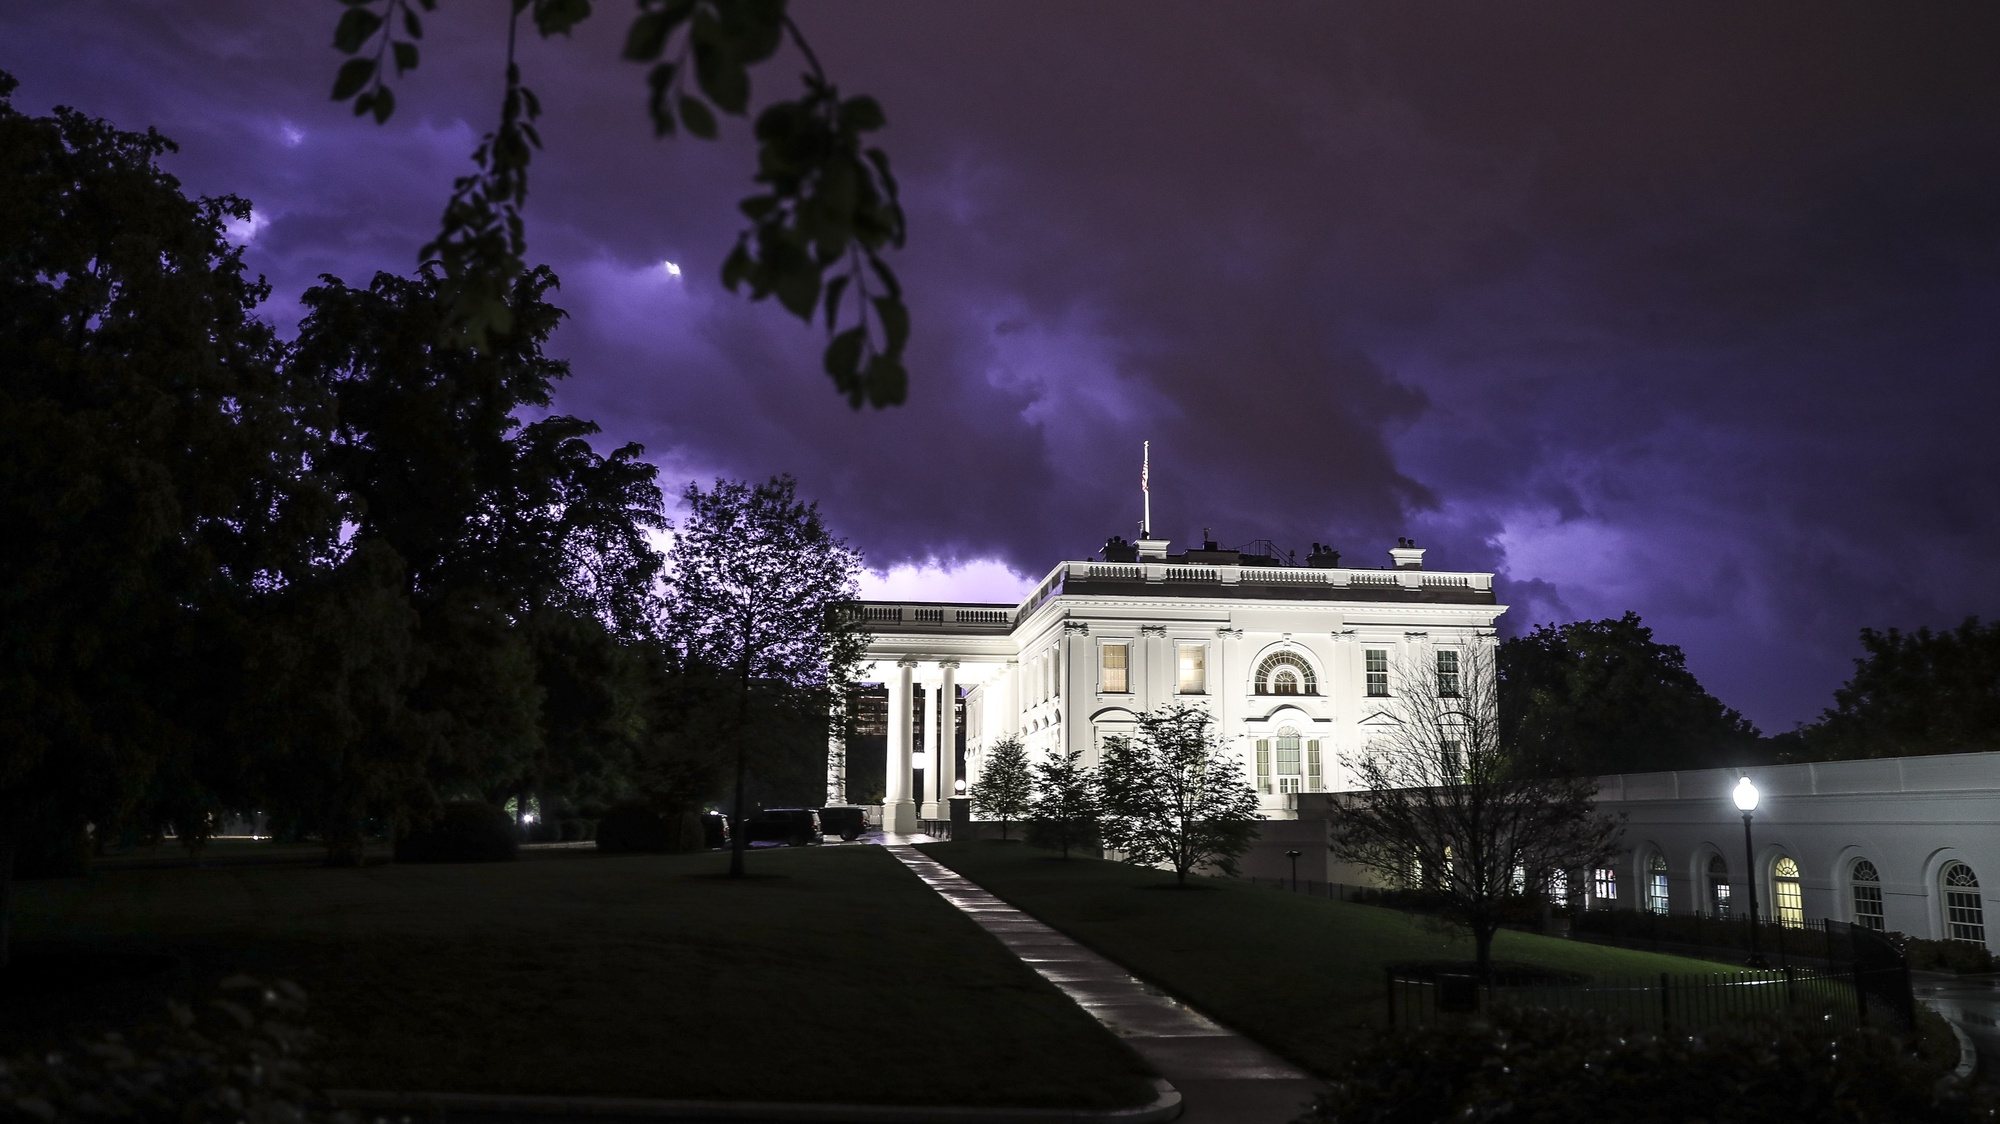 epa08399230 Lightning illuminates the clouds of a thunderstorm behind the White House in Washington, DC, USA, 03 May 2020.  EPA/Oliver Contreras / POOL